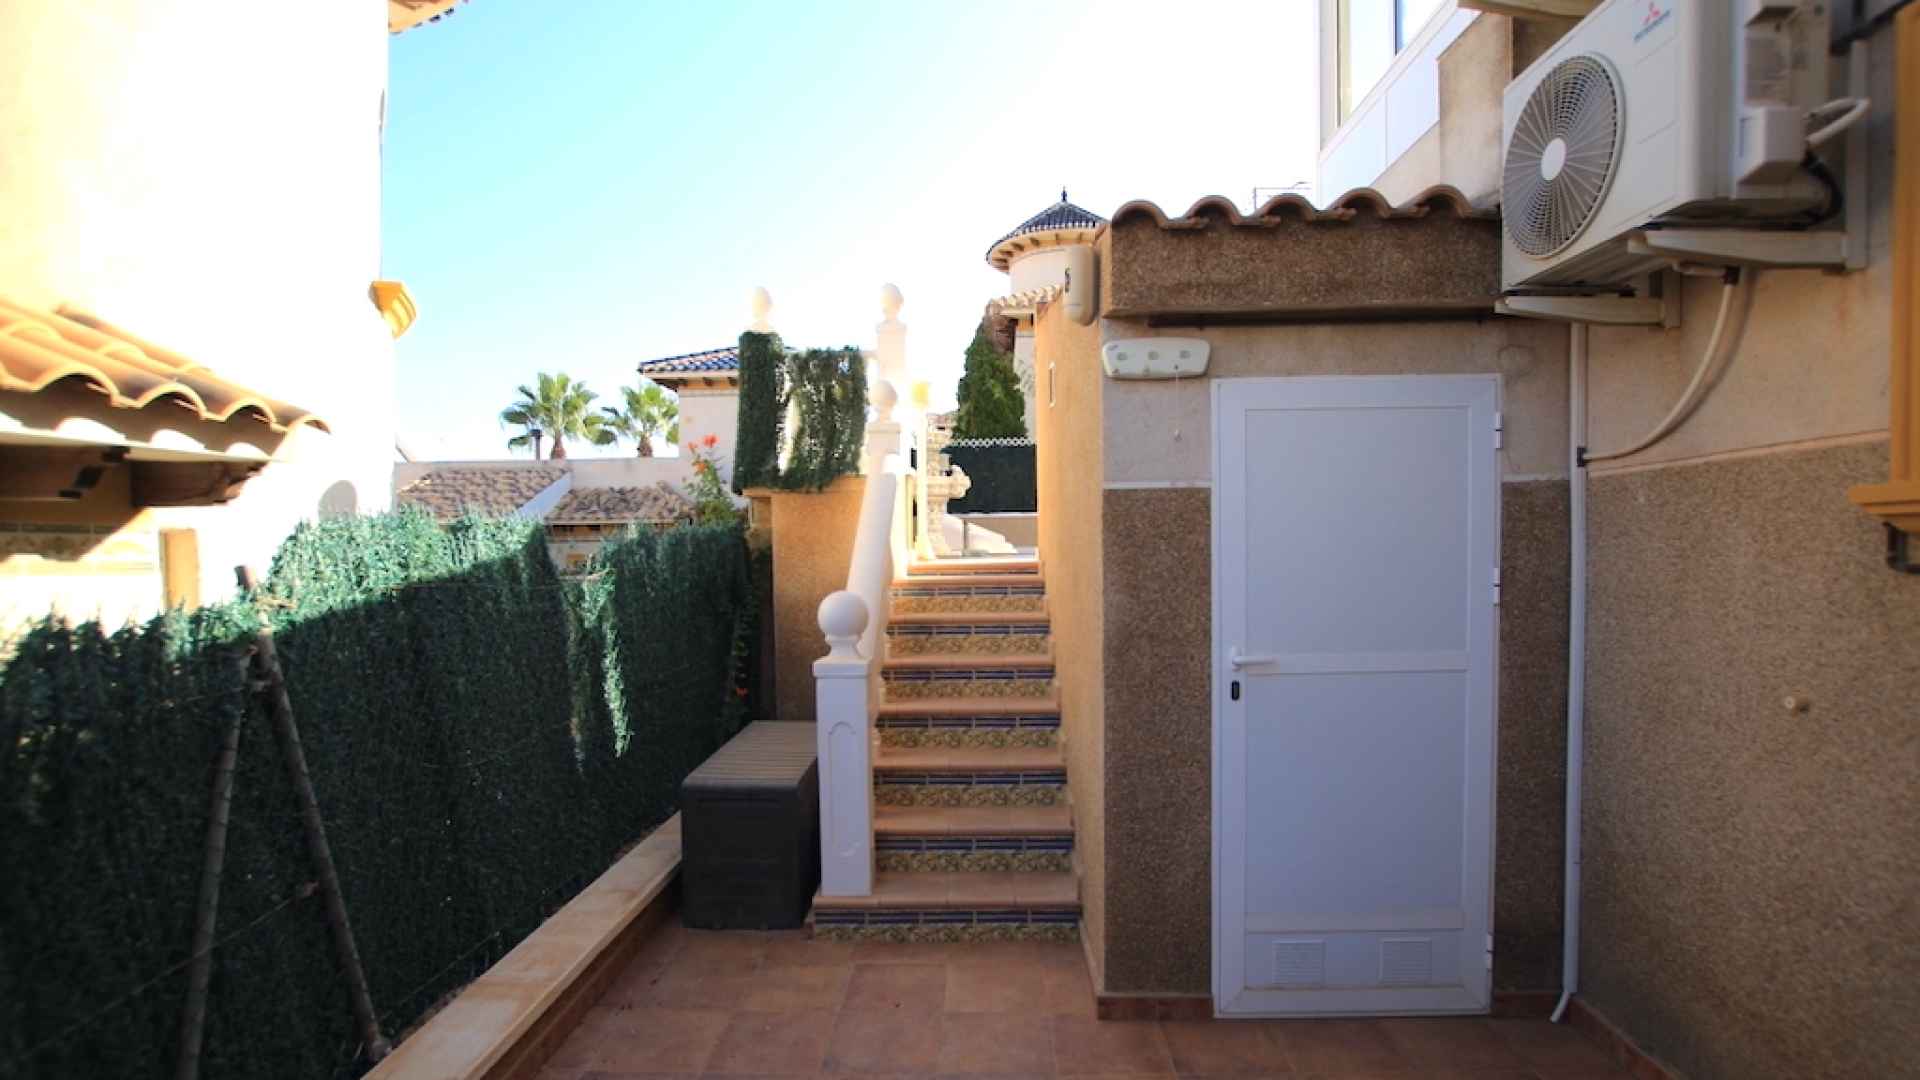 48307_spacious_5_bed_4_bath_dictated_villa_with_private_pool_201223084244_img_1971